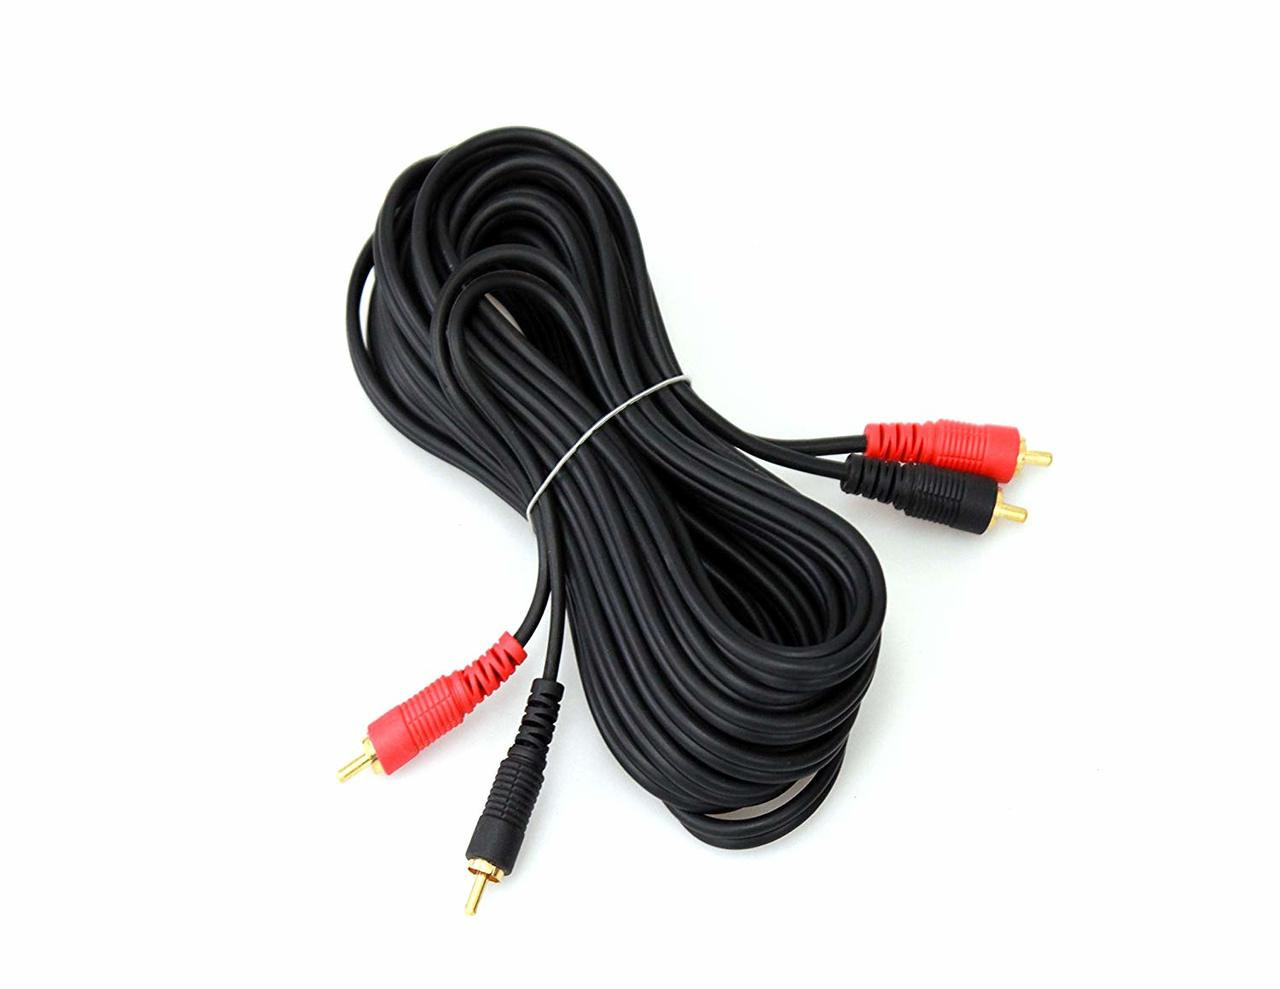 Absolute USA RCA Audio Cable (RCABK17)